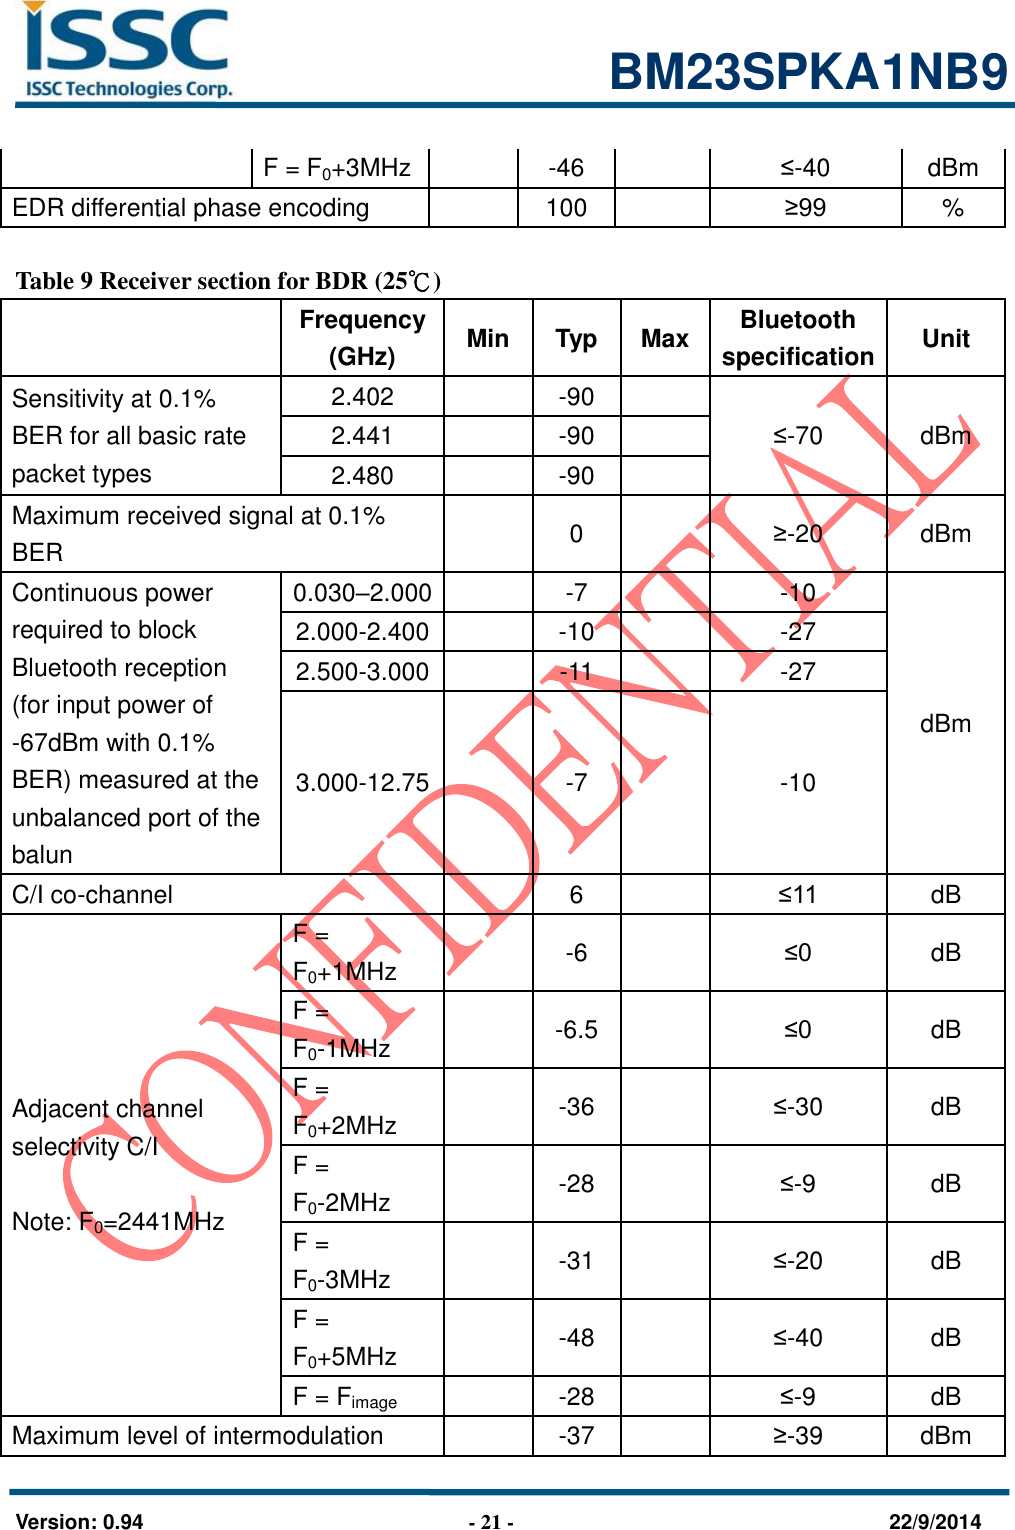                                                            BM23SPKA1NB9   Version: 0.94                              - 21 -                                    22/9/2014 F = F0+3MHz  -46  ≤-40 dBm EDR differential phase encoding  100  ≥99 %  Table 9 Receiver section for BDR (25℃)  Frequency (GHz) Min Typ Max Bluetooth specification Unit Sensitivity at 0.1% BER for all basic rate packet types 2.402  -90  ≤-70 dBm 2.441  -90  2.480  -90  Maximum received signal at 0.1% BER  0  ≥-20 dBm Continuous power required to block Bluetooth reception (for input power of -67dBm with 0.1% BER) measured at the unbalanced port of the balun 0.030–2.000  -7  -10 dBm 2.000-2.400  -10  -27 2.500-3.000  -11  -27 3.000-12.75  -7  -10 C/I co-channel  6  ≤11 dB Adjacent channel selectivity C/I  Note: F0=2441MHz F = F0+1MHz  -6  ≤0 dB F = F0-1MHz  -6.5  ≤0 dB F = F0+2MHz  -36  ≤-30 dB F = F0-2MHz  -28  ≤-9 dB F = F0-3MHz  -31  ≤-20 dB F = F0+5MHz  -48  ≤-40 dB F = Fimage  -28  ≤-9 dB Maximum level of intermodulation  -37  ≥-39 dBm 